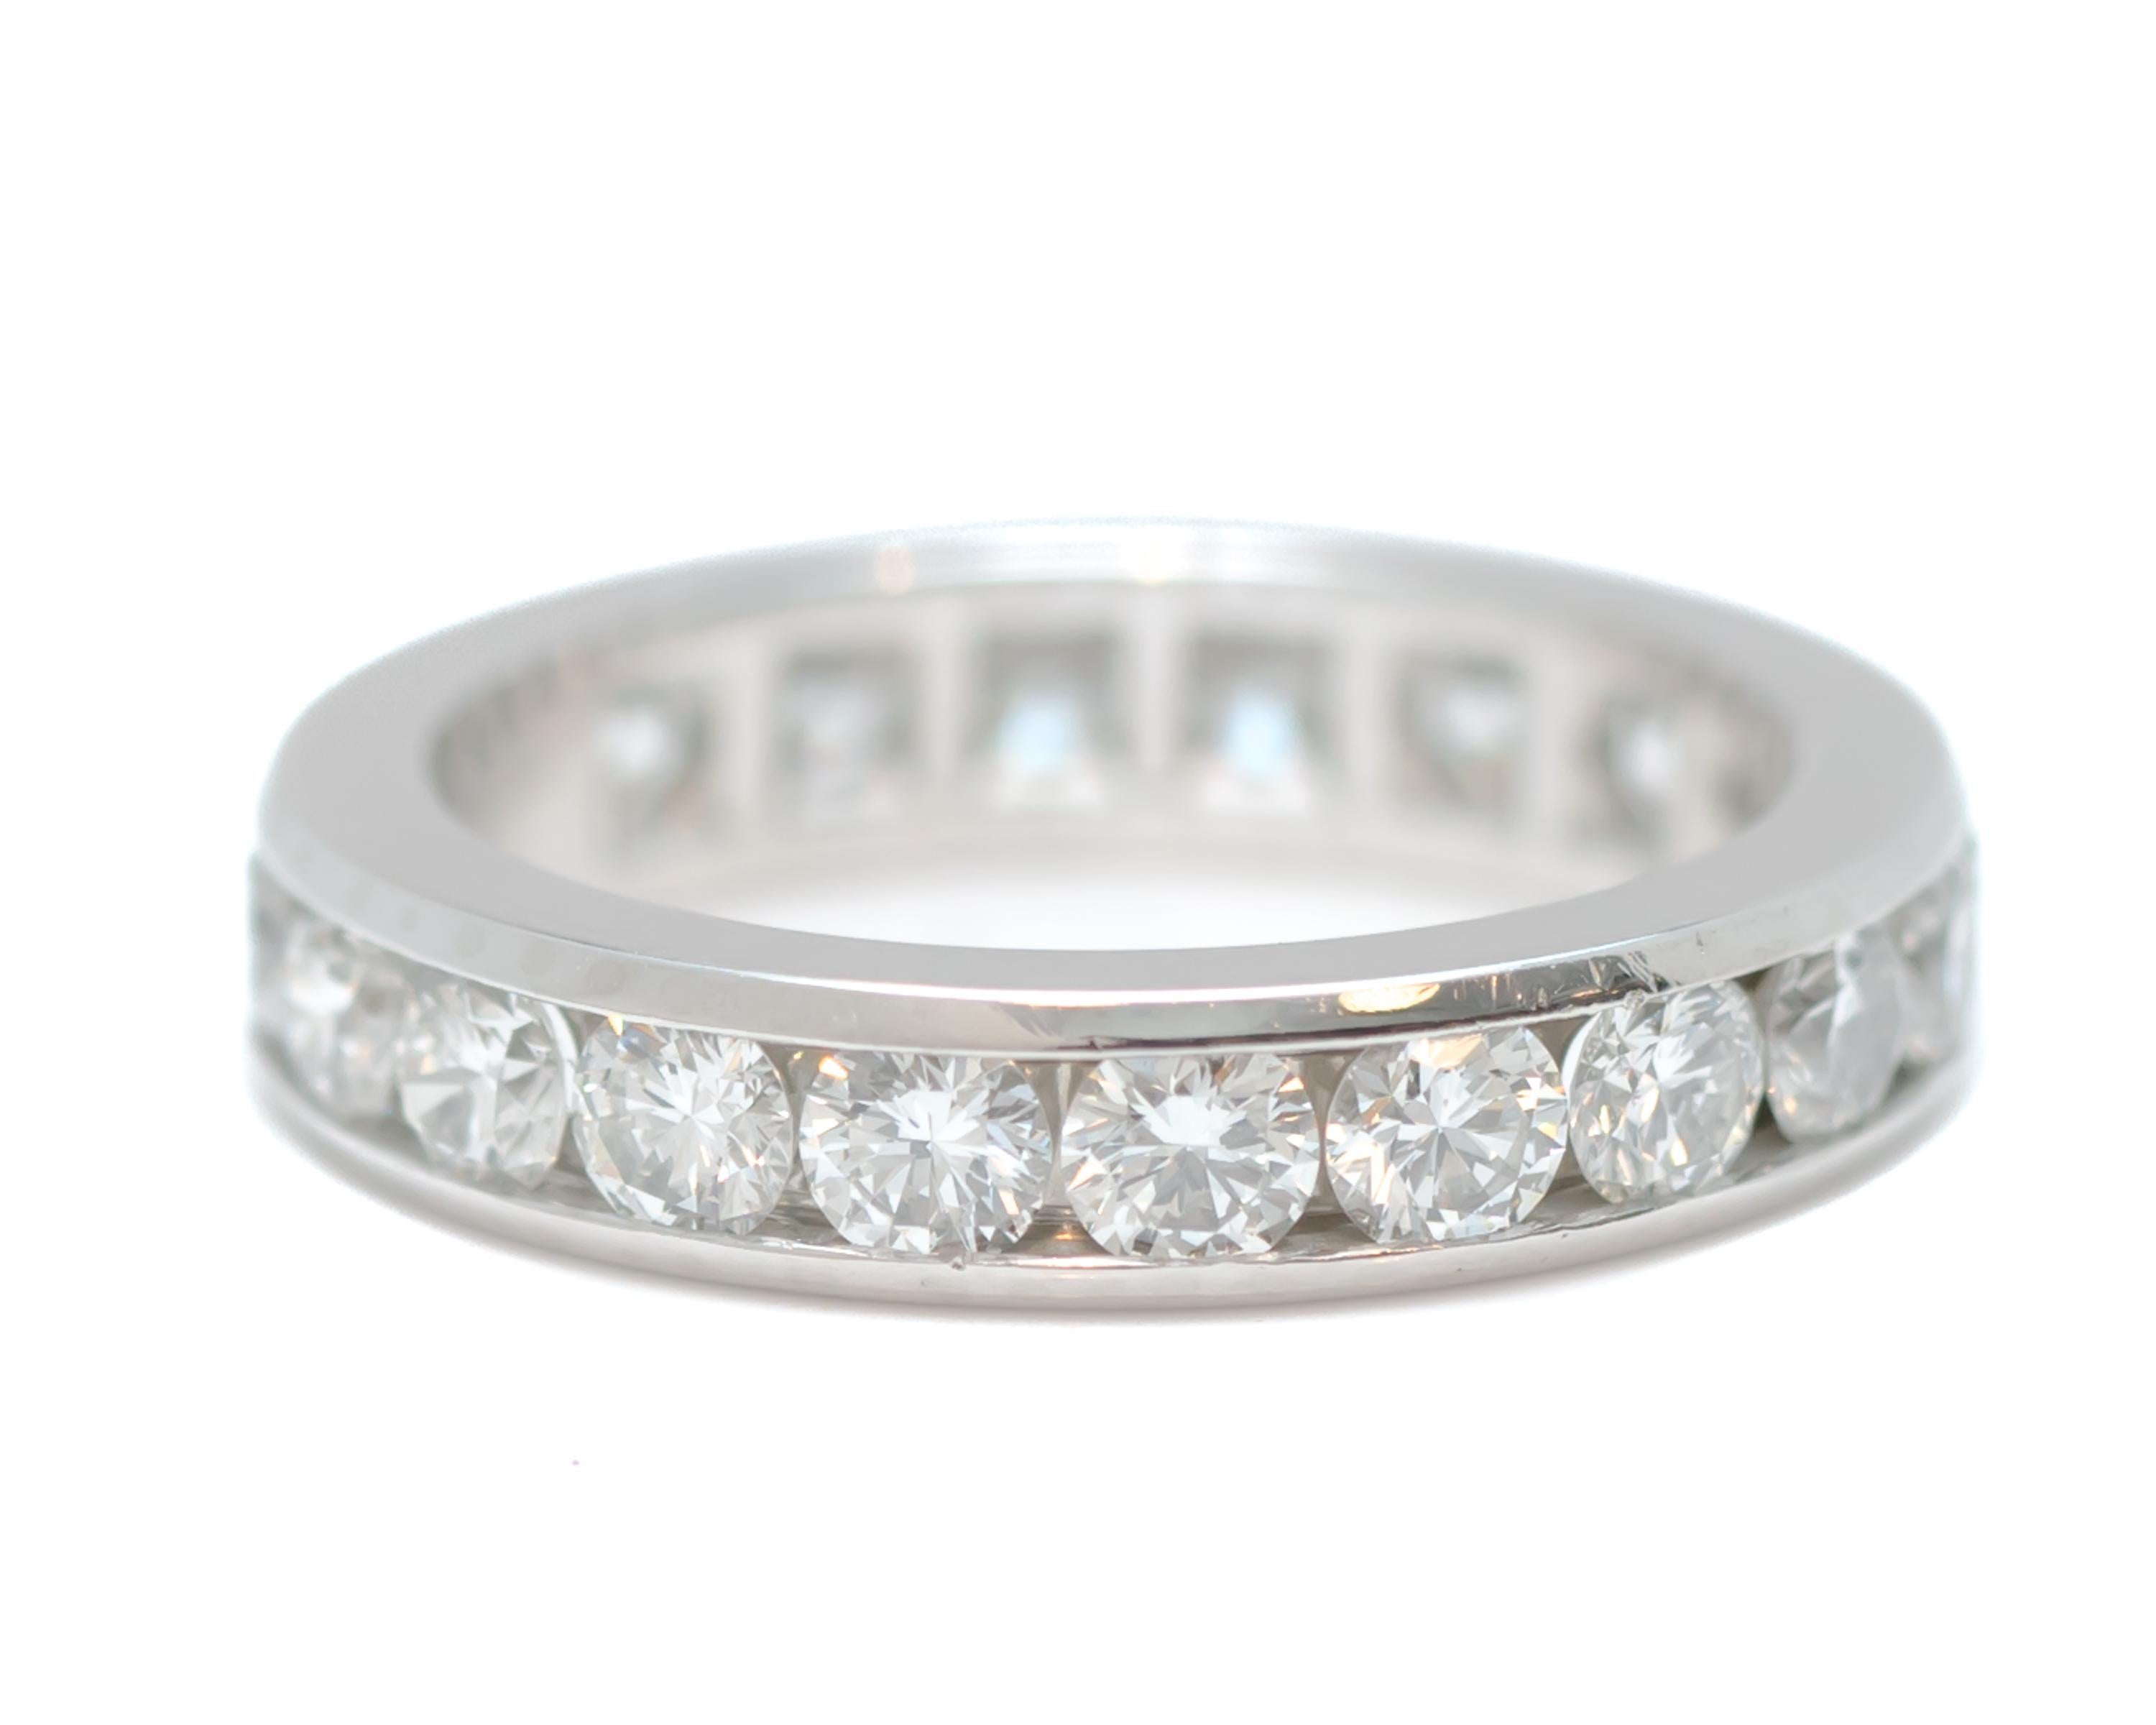 Tiffany and Co. 2.9 Carat total Diamond and Platinum Eternity Band 

Ring Details:
Size: 5.25, cannot be resized
Width: 4 millimeters
Finger to top of stone: 2 millimeters
Metal: Platinum
Weight: 5.9 grams
Hallmark: TIFFANY & CO. PT950

Diamond